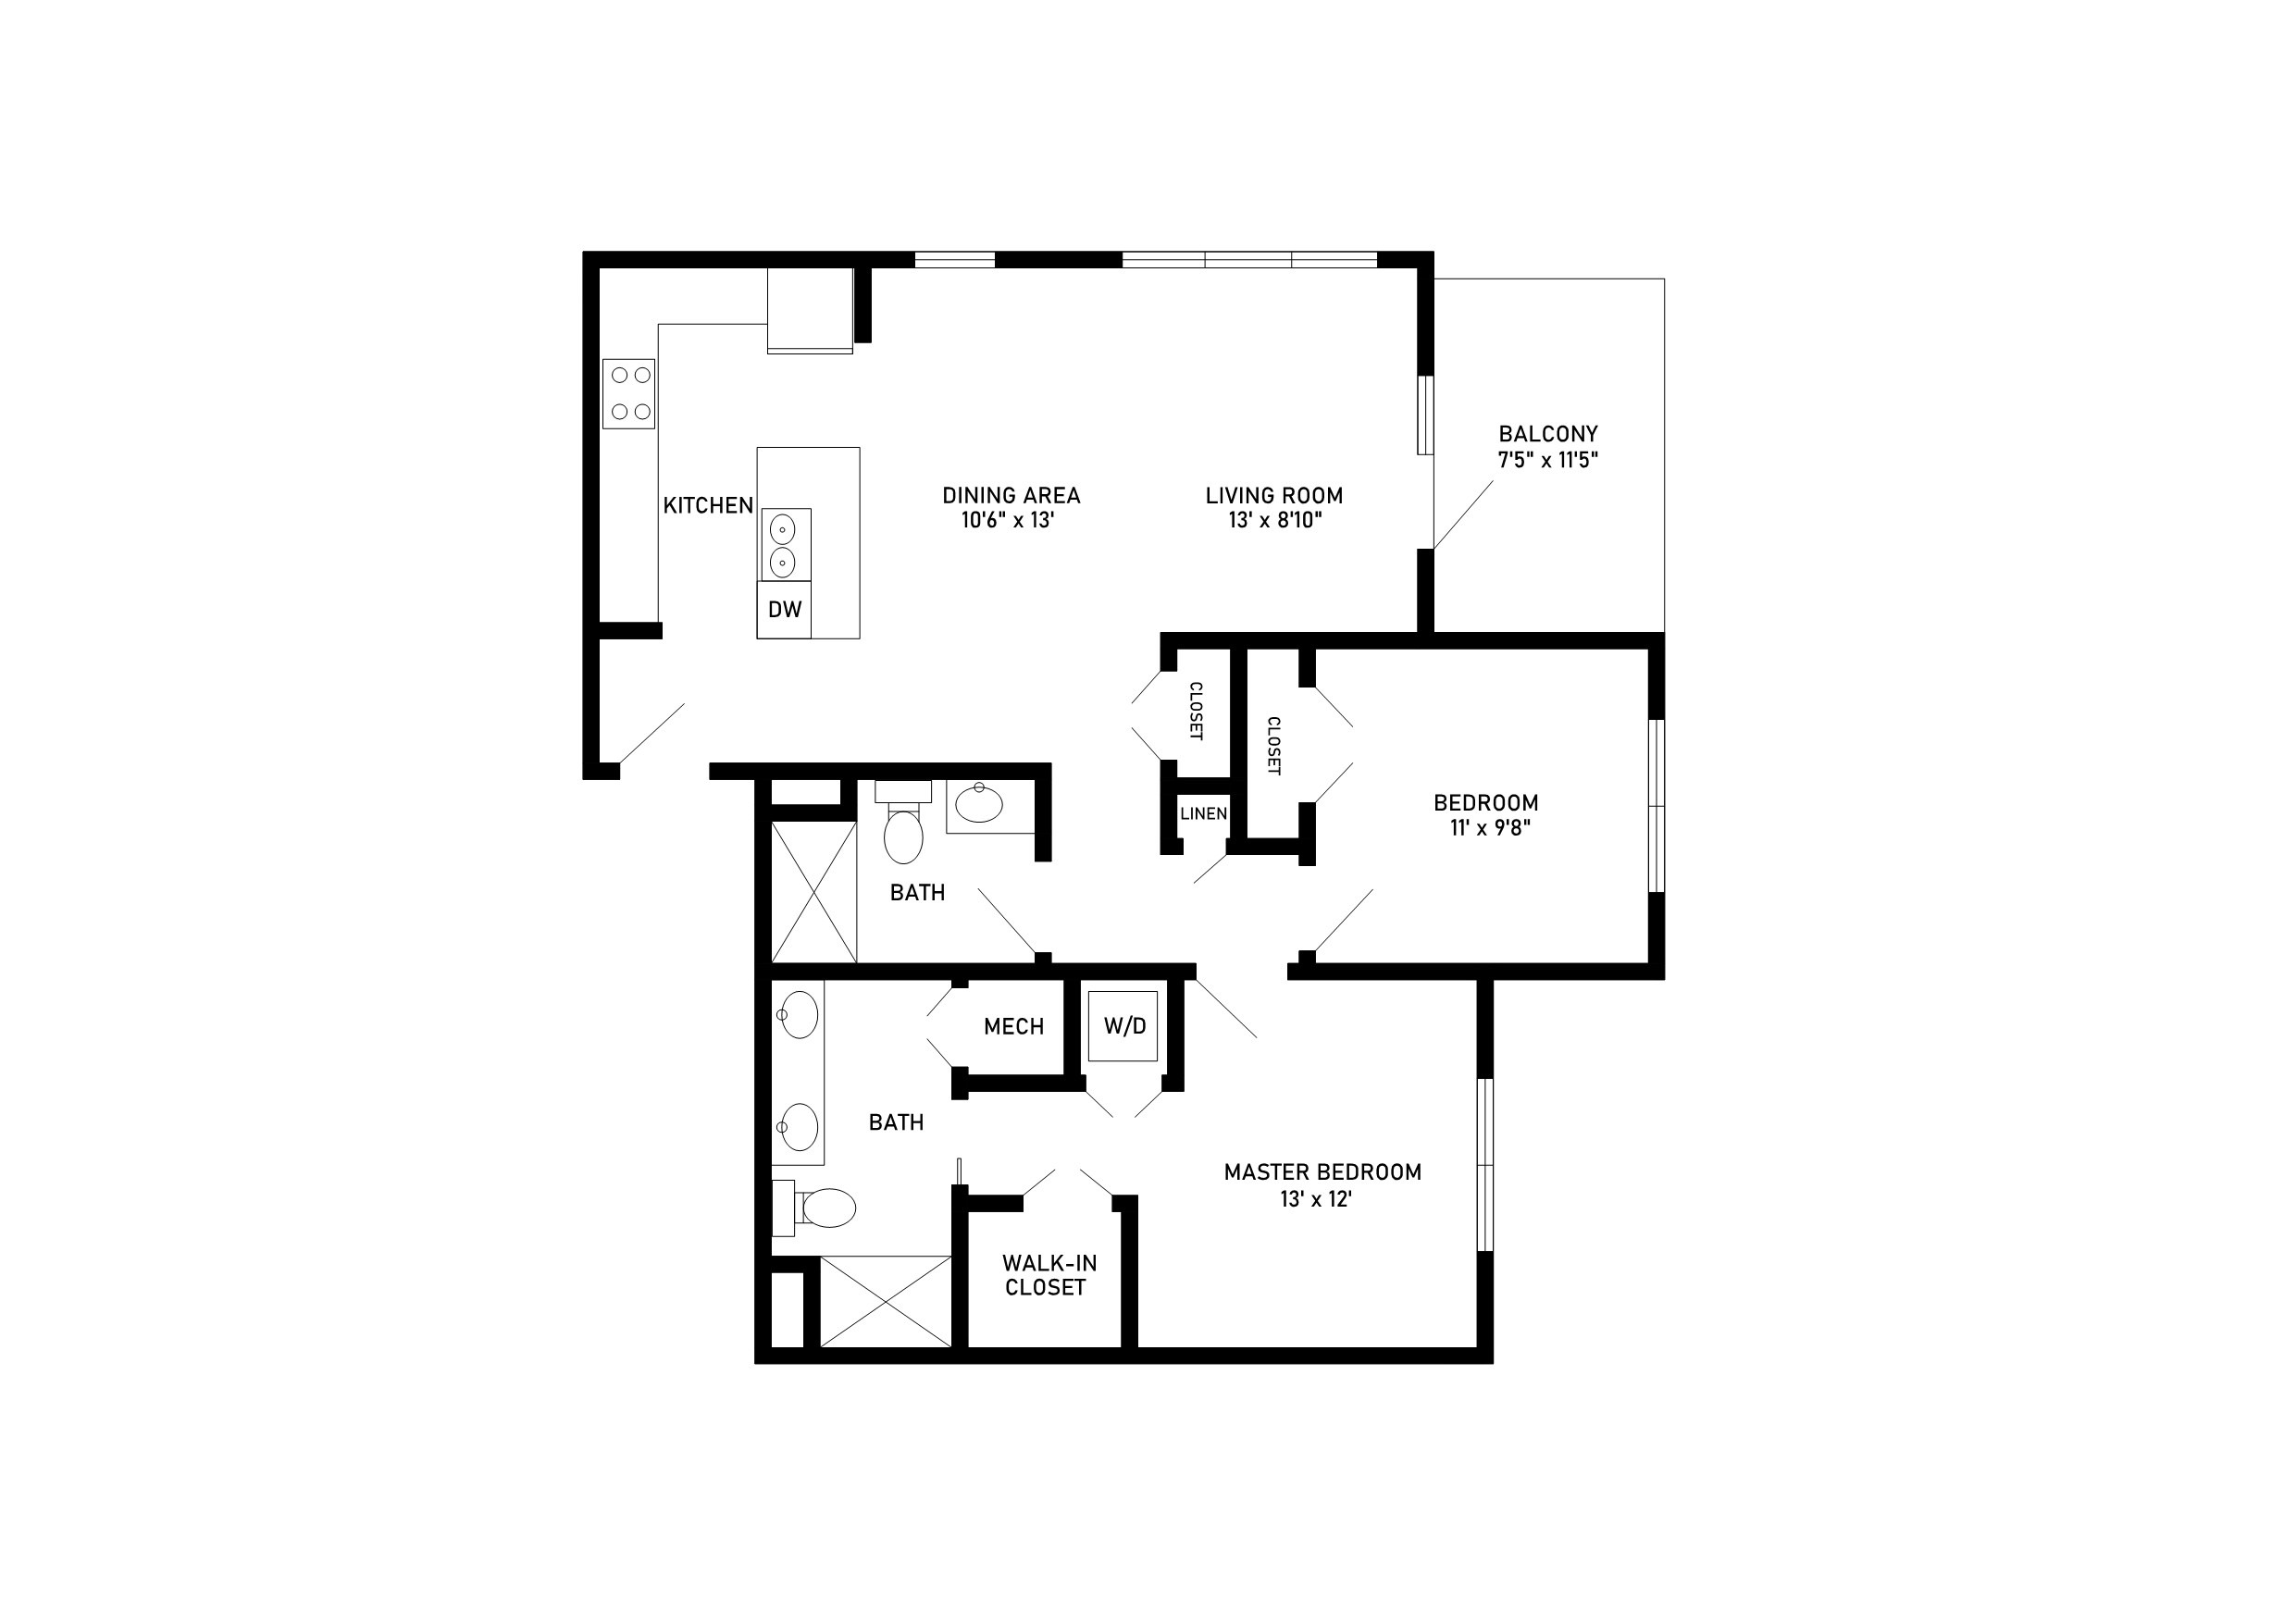 Thumbnail image town center 2 bed apartment 1164 square feet